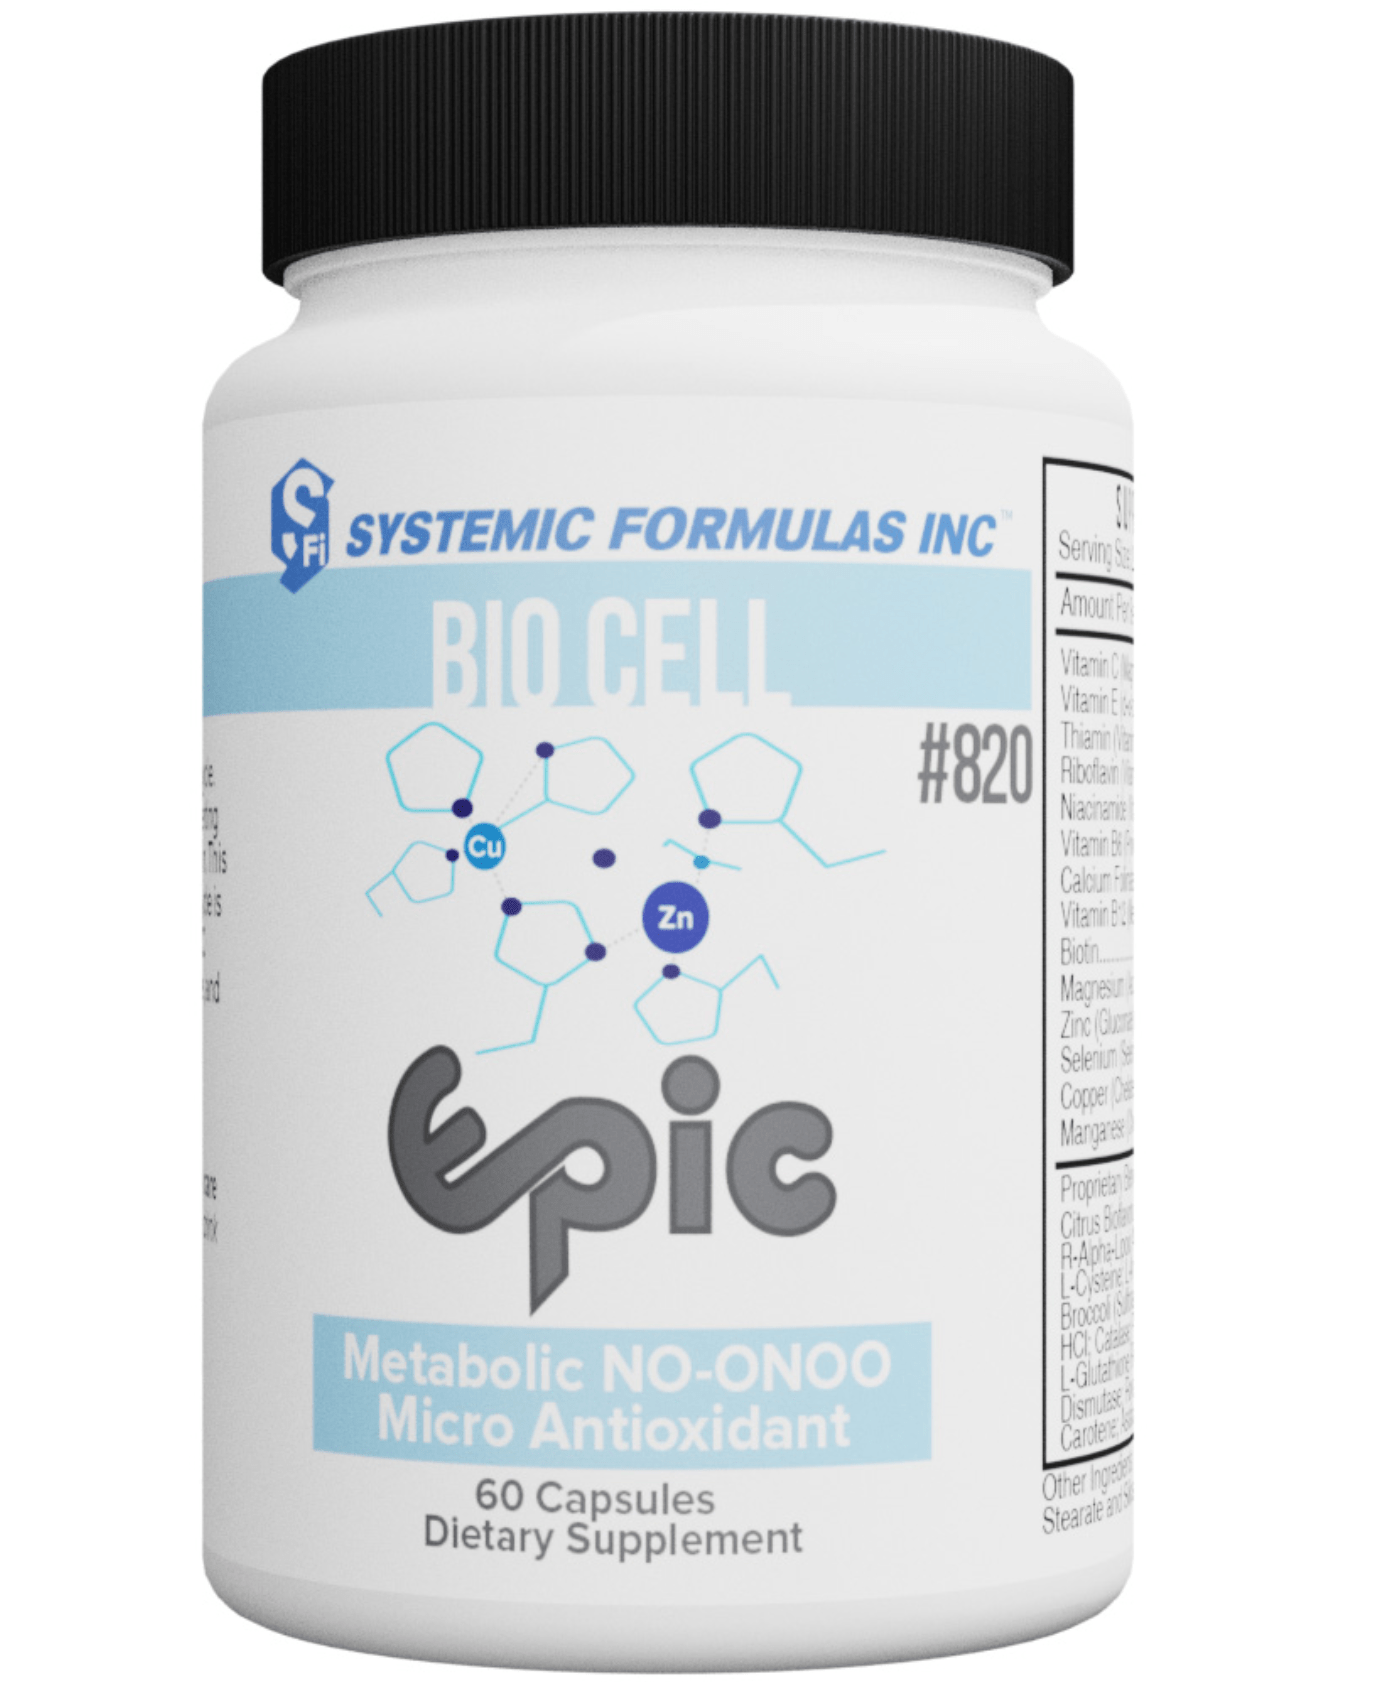 Epic by Systemic Formulas  Metabolic NO-ONOO Micro Intra-Cellular